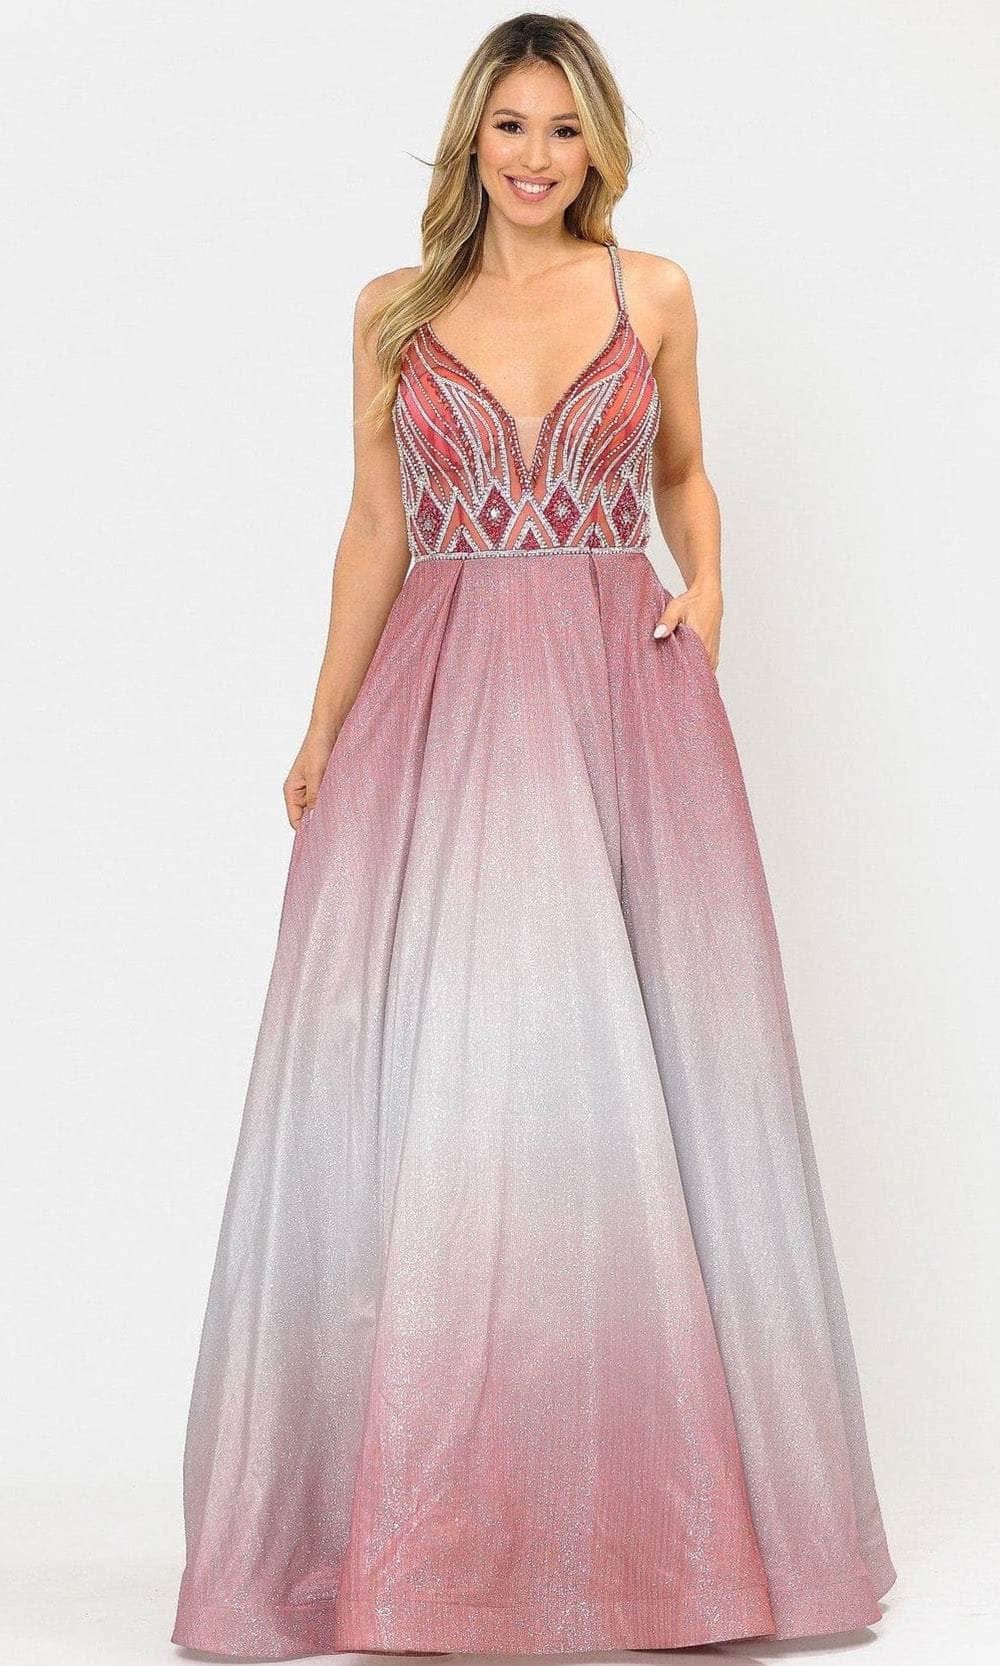 Poly USA 8350 - Sheer Beaded Ombre A-Line Prom Dress
